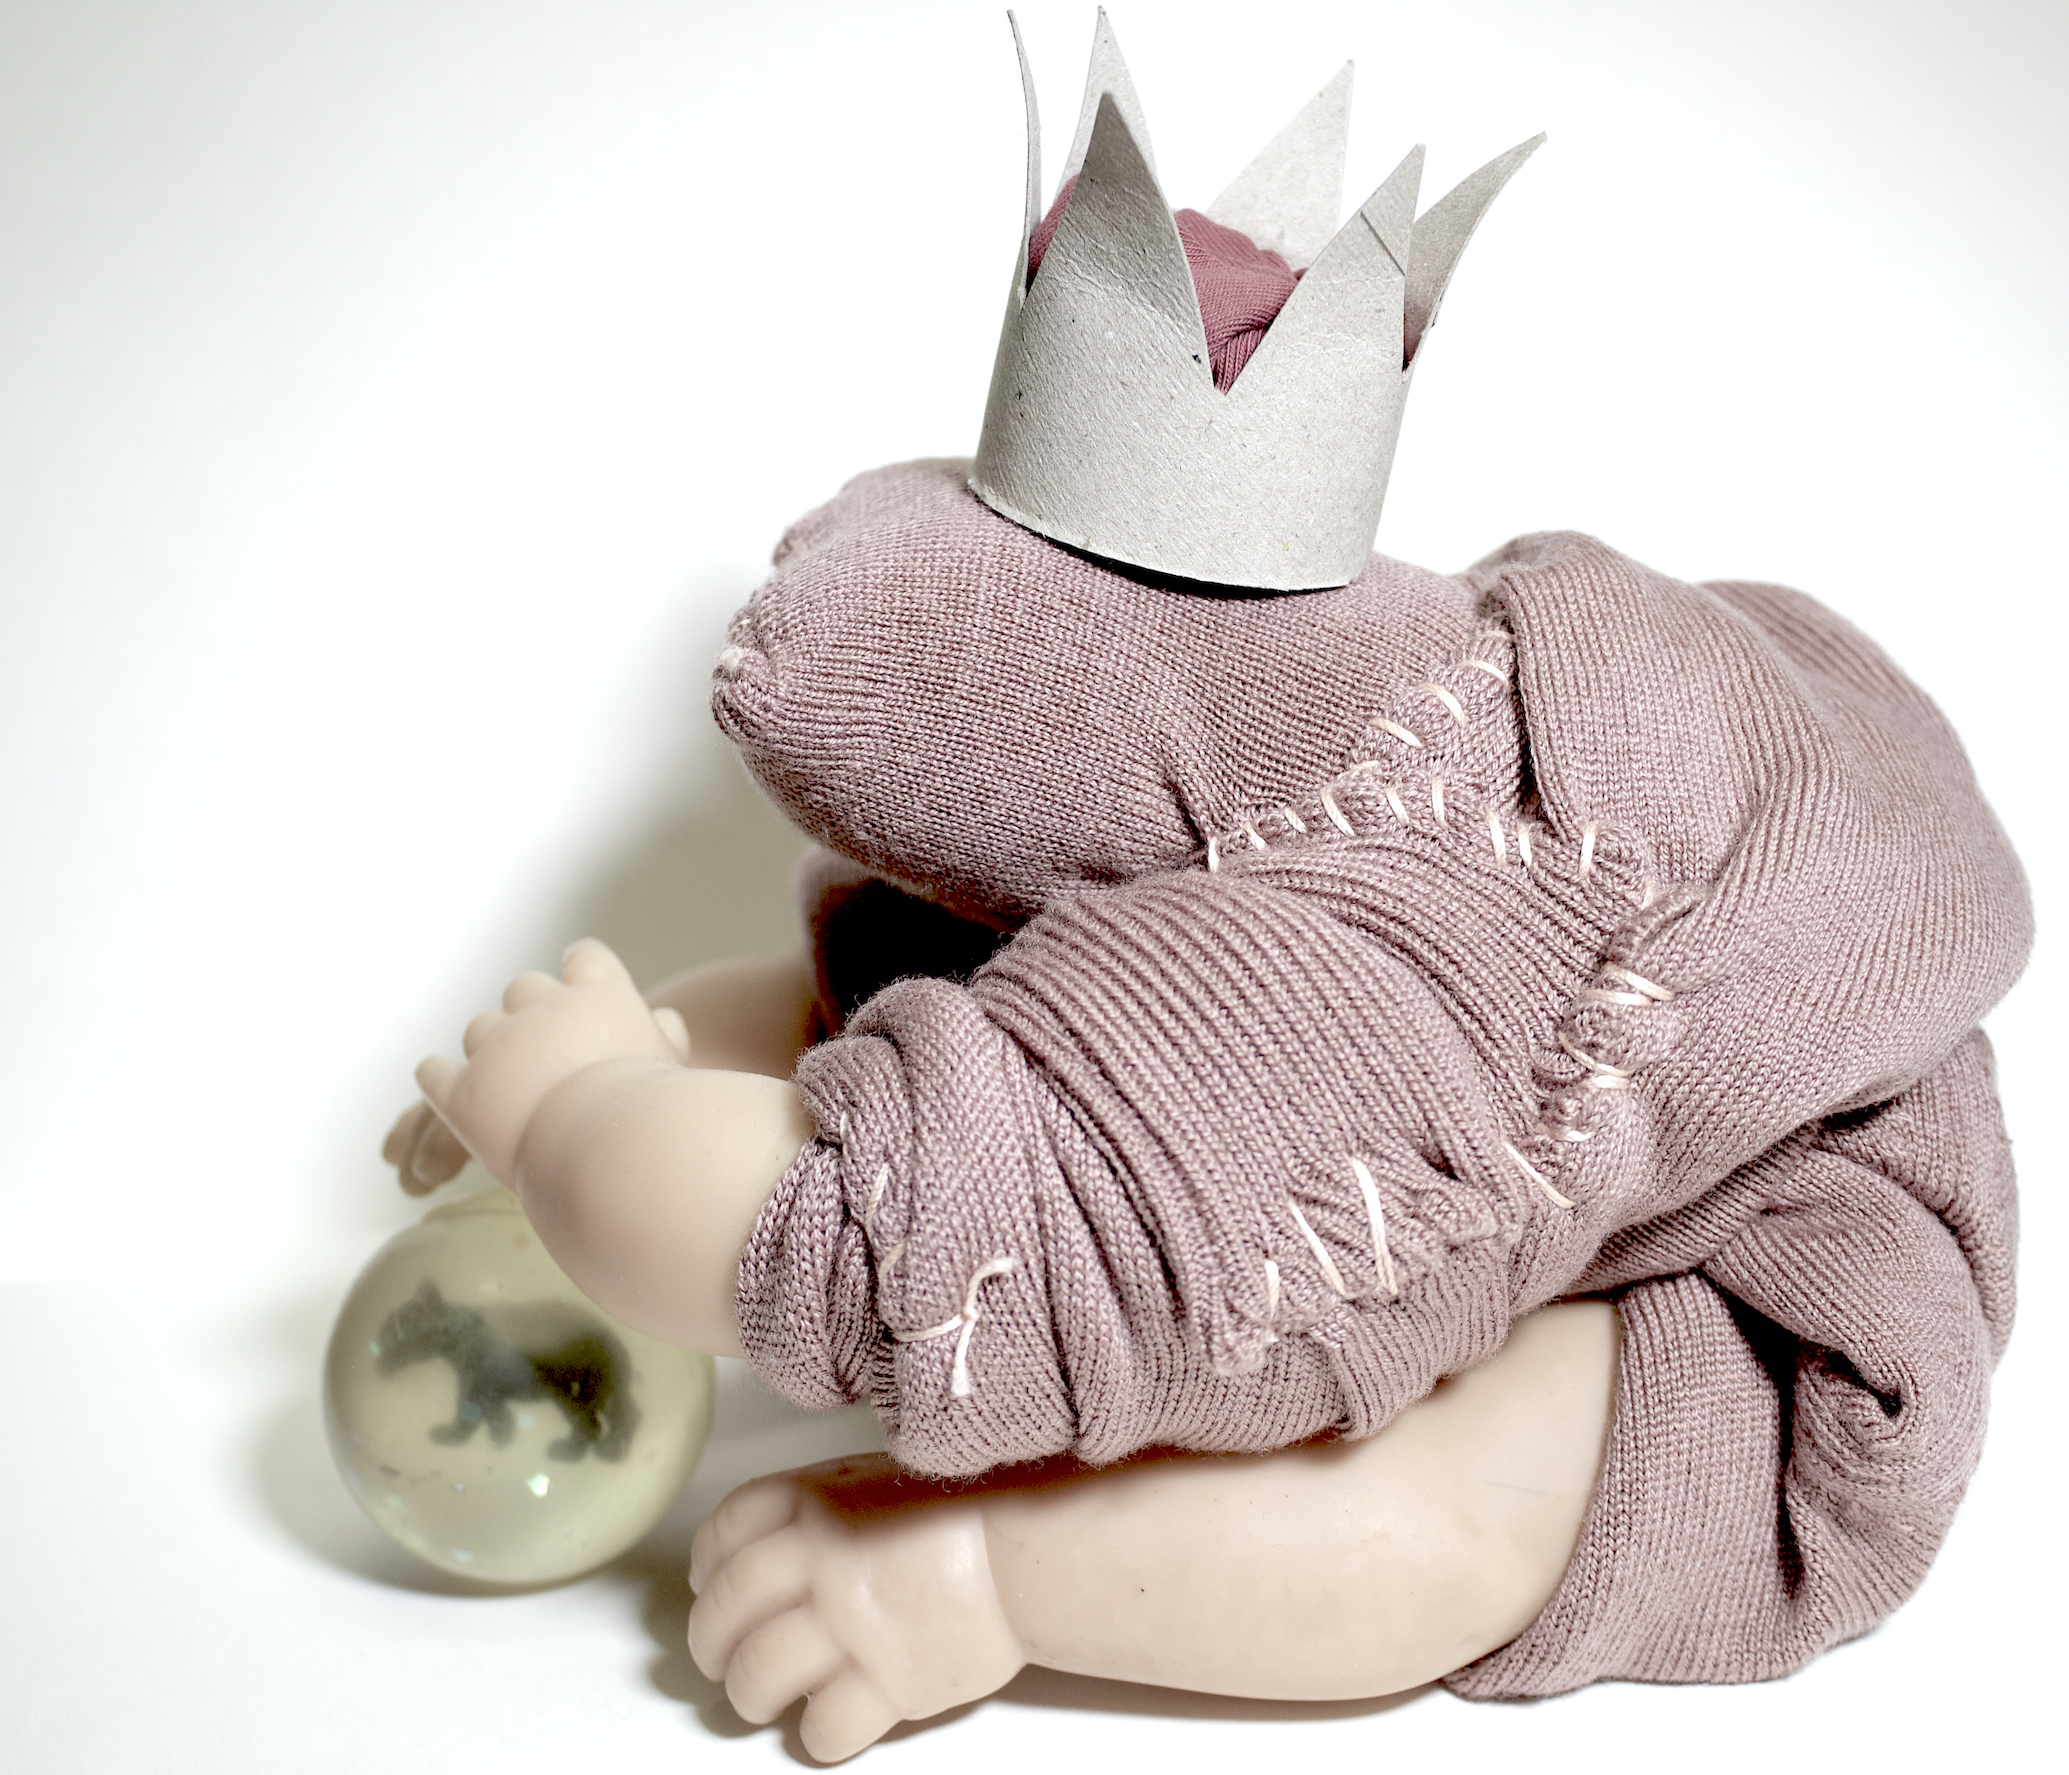 The sculptural work was created during the first Covid-19 lockdown, whereas the artist could only use existing materials from her home studio. An old dusty pink jumper was used as the body sewn together and four doll hands were used as the legs. The frog is holding an old translucent bouncy ball with a small plastic animal embedded into it donated by the artist’s son. The crown the frog wears was created from a toilet roll as the documentation of the panic buying of toilet rolls at the time.